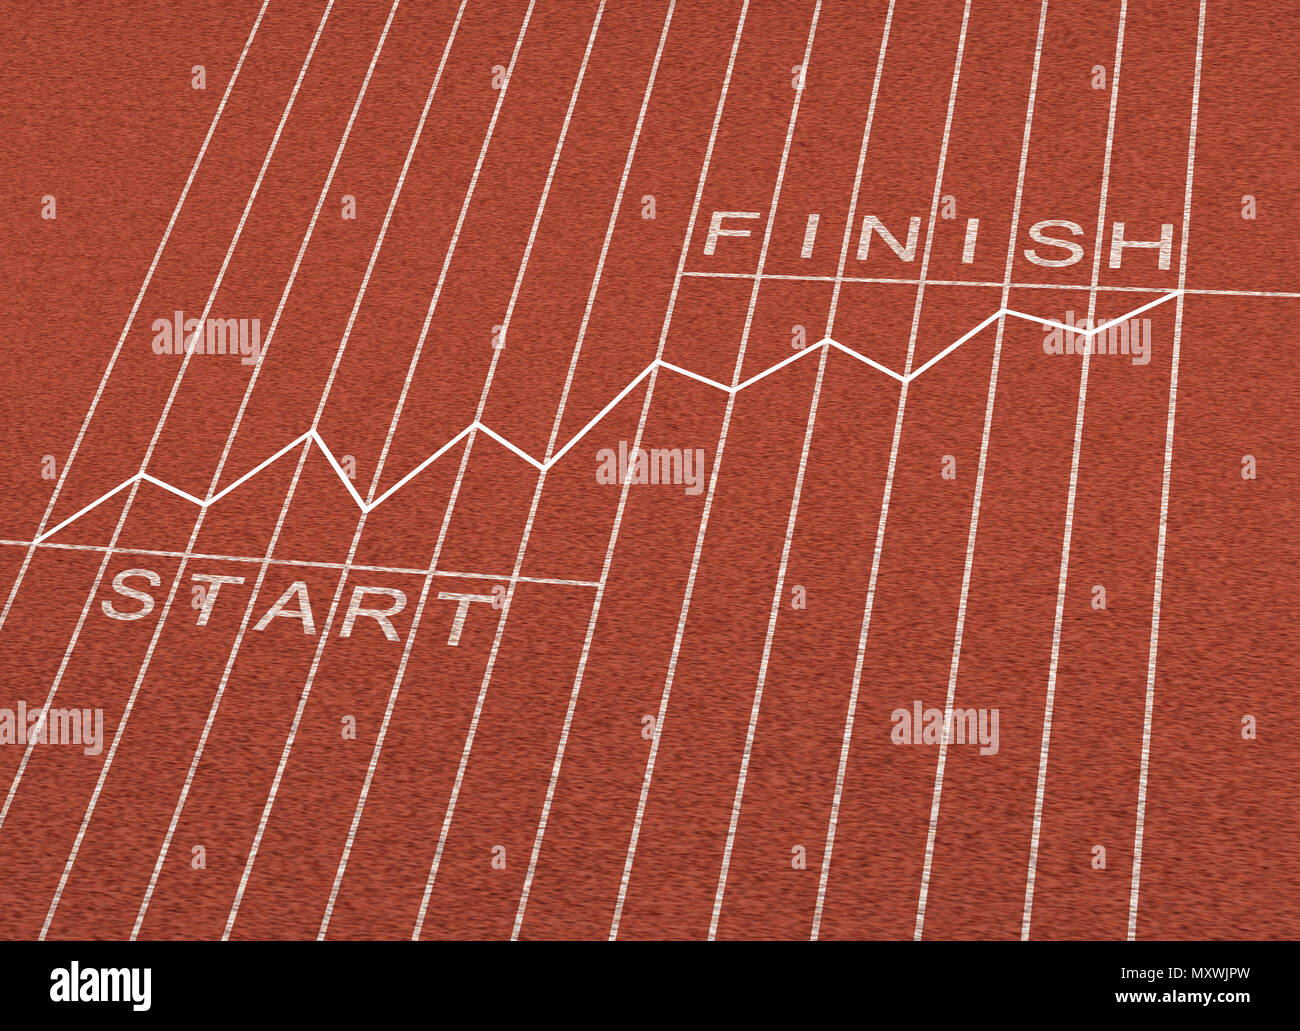 Financial planning and business plan as a track and field with a finance profit chart as an economic wealth strategy in a 3D illustration style. Stock Photo